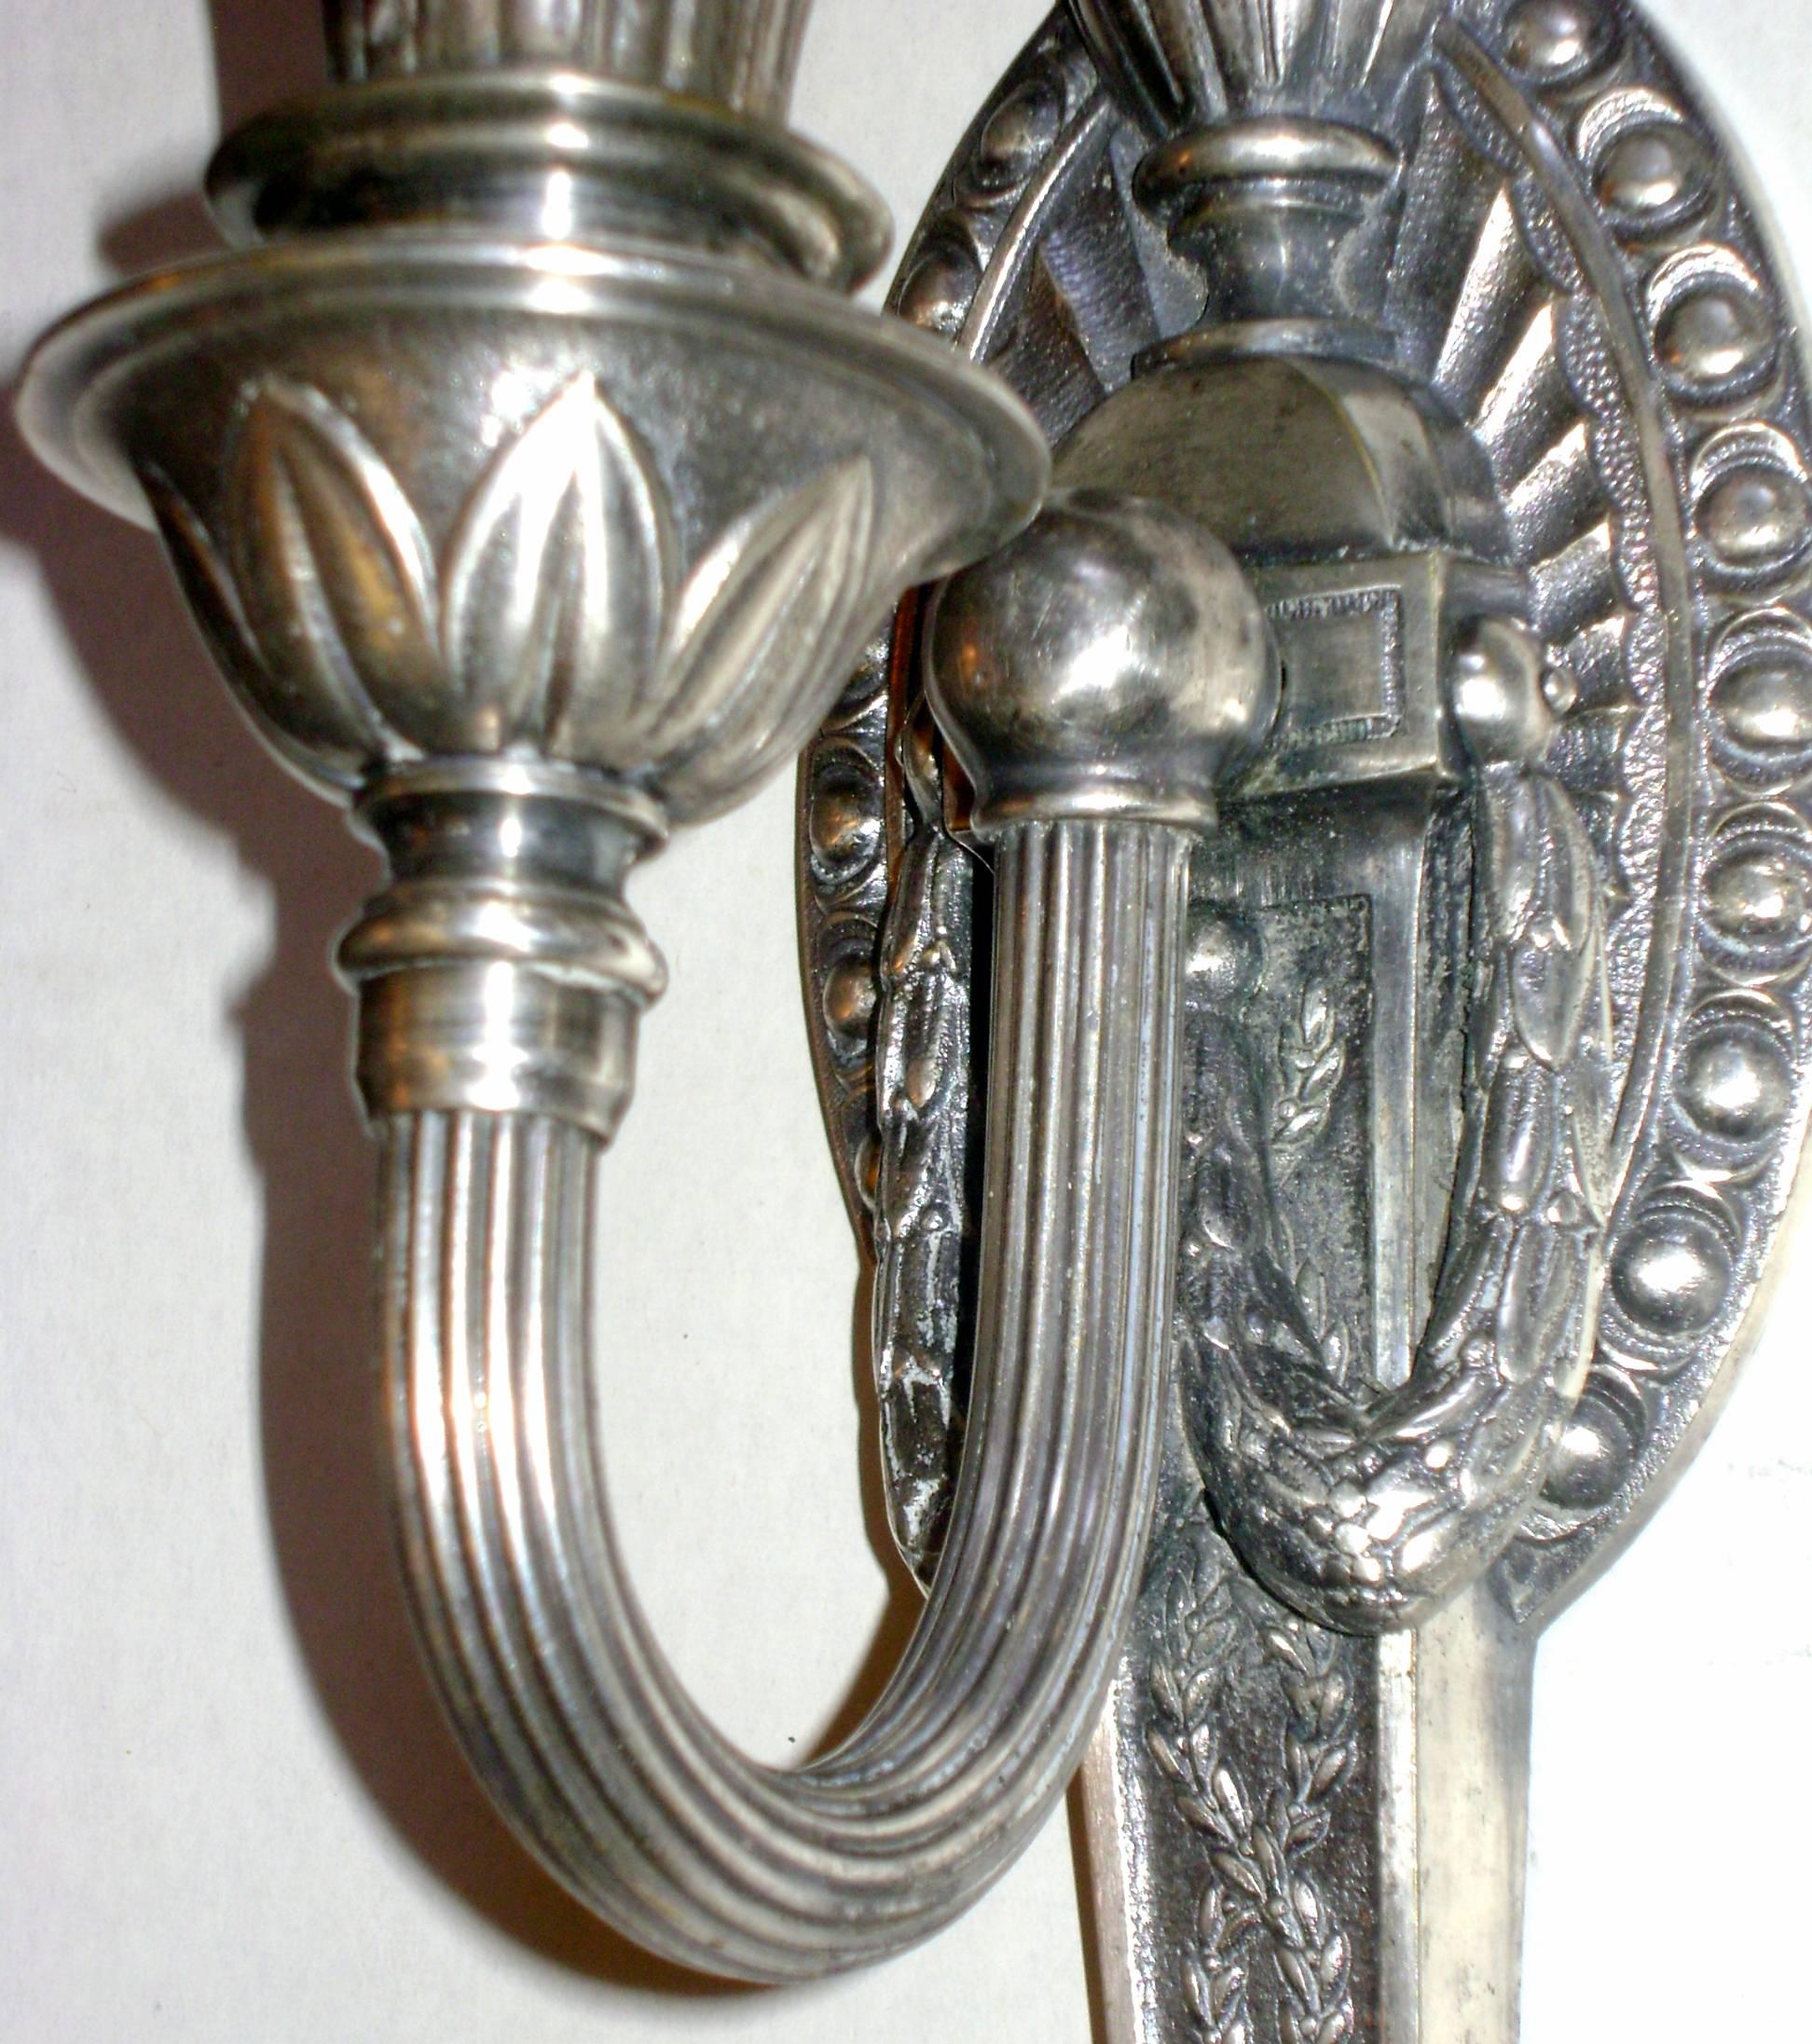 Pair of 1920s English neoclassic style single light sconces with silver plated finish.

Measurements:
Height 14.75